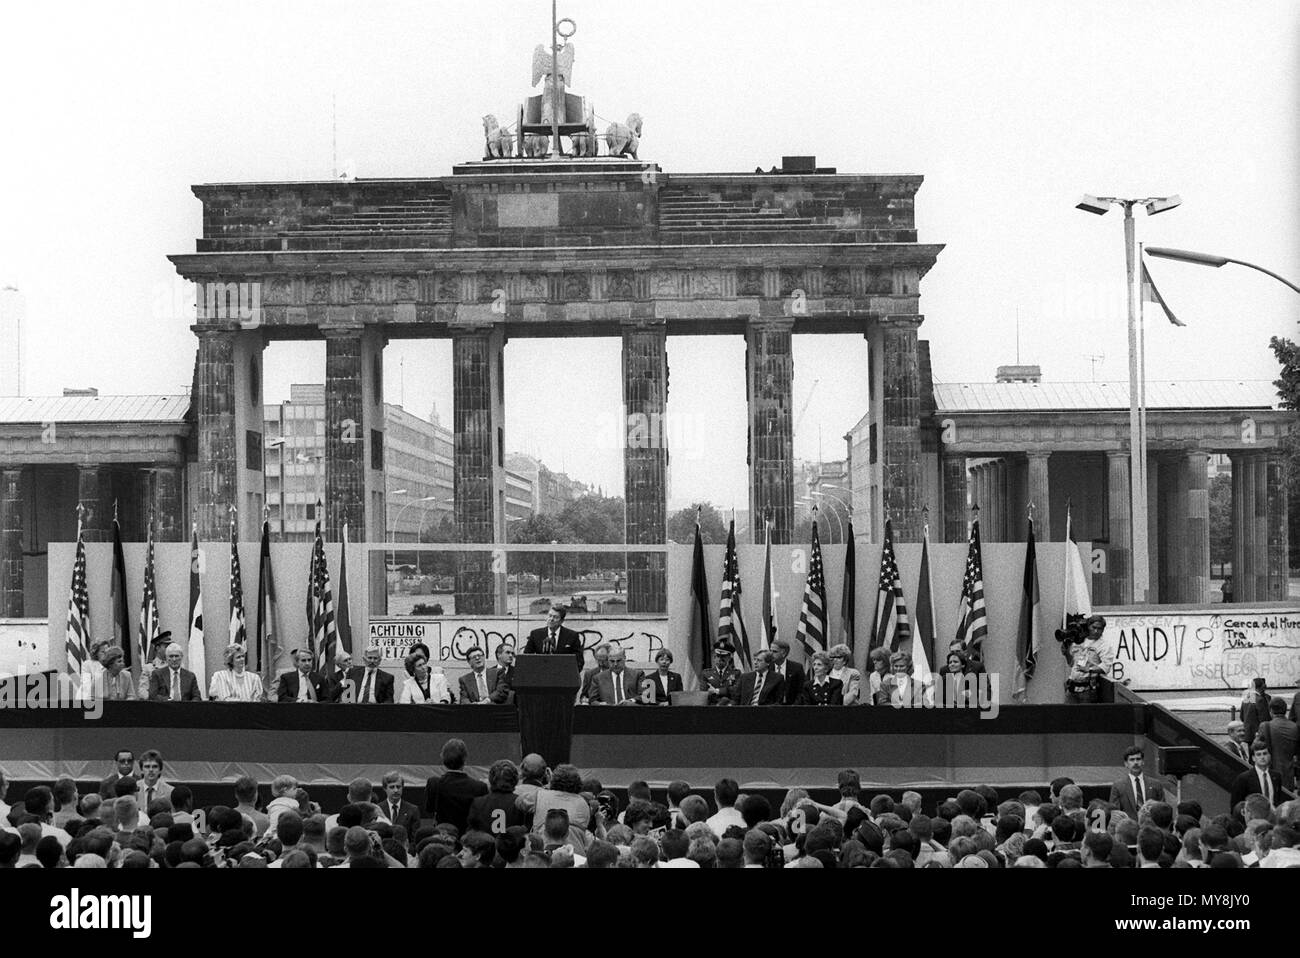 US President Ronald Reagan (C) gives a speech at the Berlin Wall by the Brandenburg Gate in West Berlin, on 12 June 1987. On the right beside him is German Chancellor Helmut Kohl. Around 25,000 people cheered his  famous words "Mr. Gorbachev, tear down this wall!" Reagan was in Berlin for several hours on the city's 750th anniversary. | usage worldwide Stock Photo